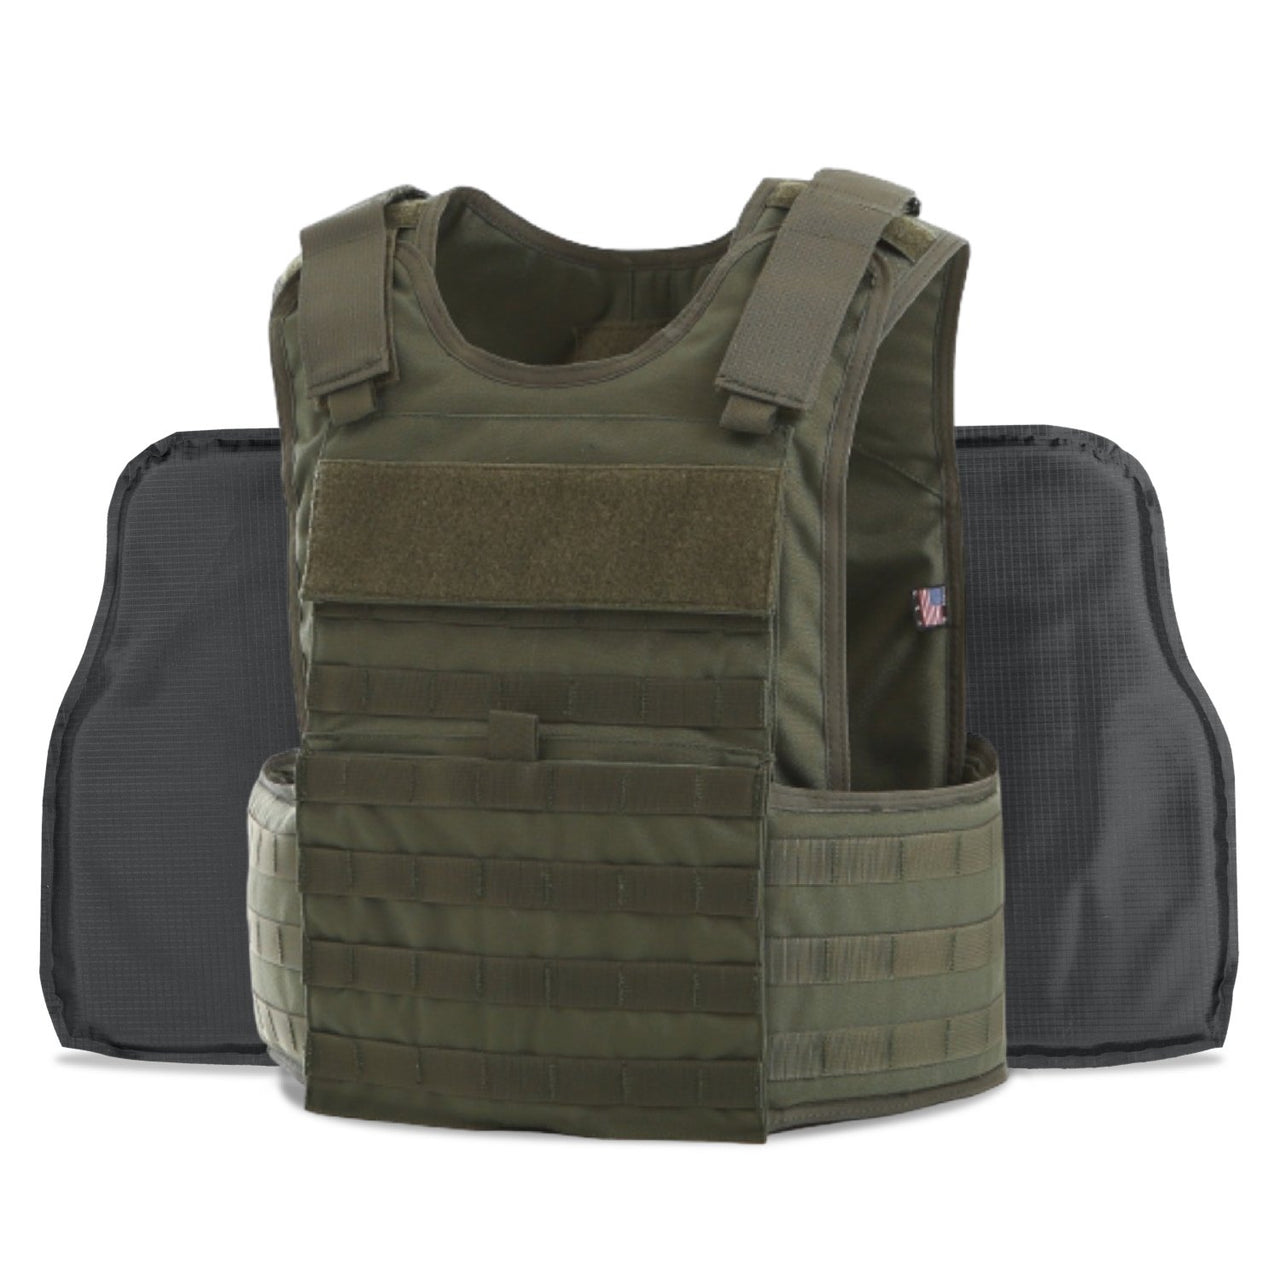 Olive green multi-threat tactical bulletproof vest displayed with front and back armor plates, featuring velcro patches and pouch attachments, NIJ Certified armor, by Body Armor Direct.